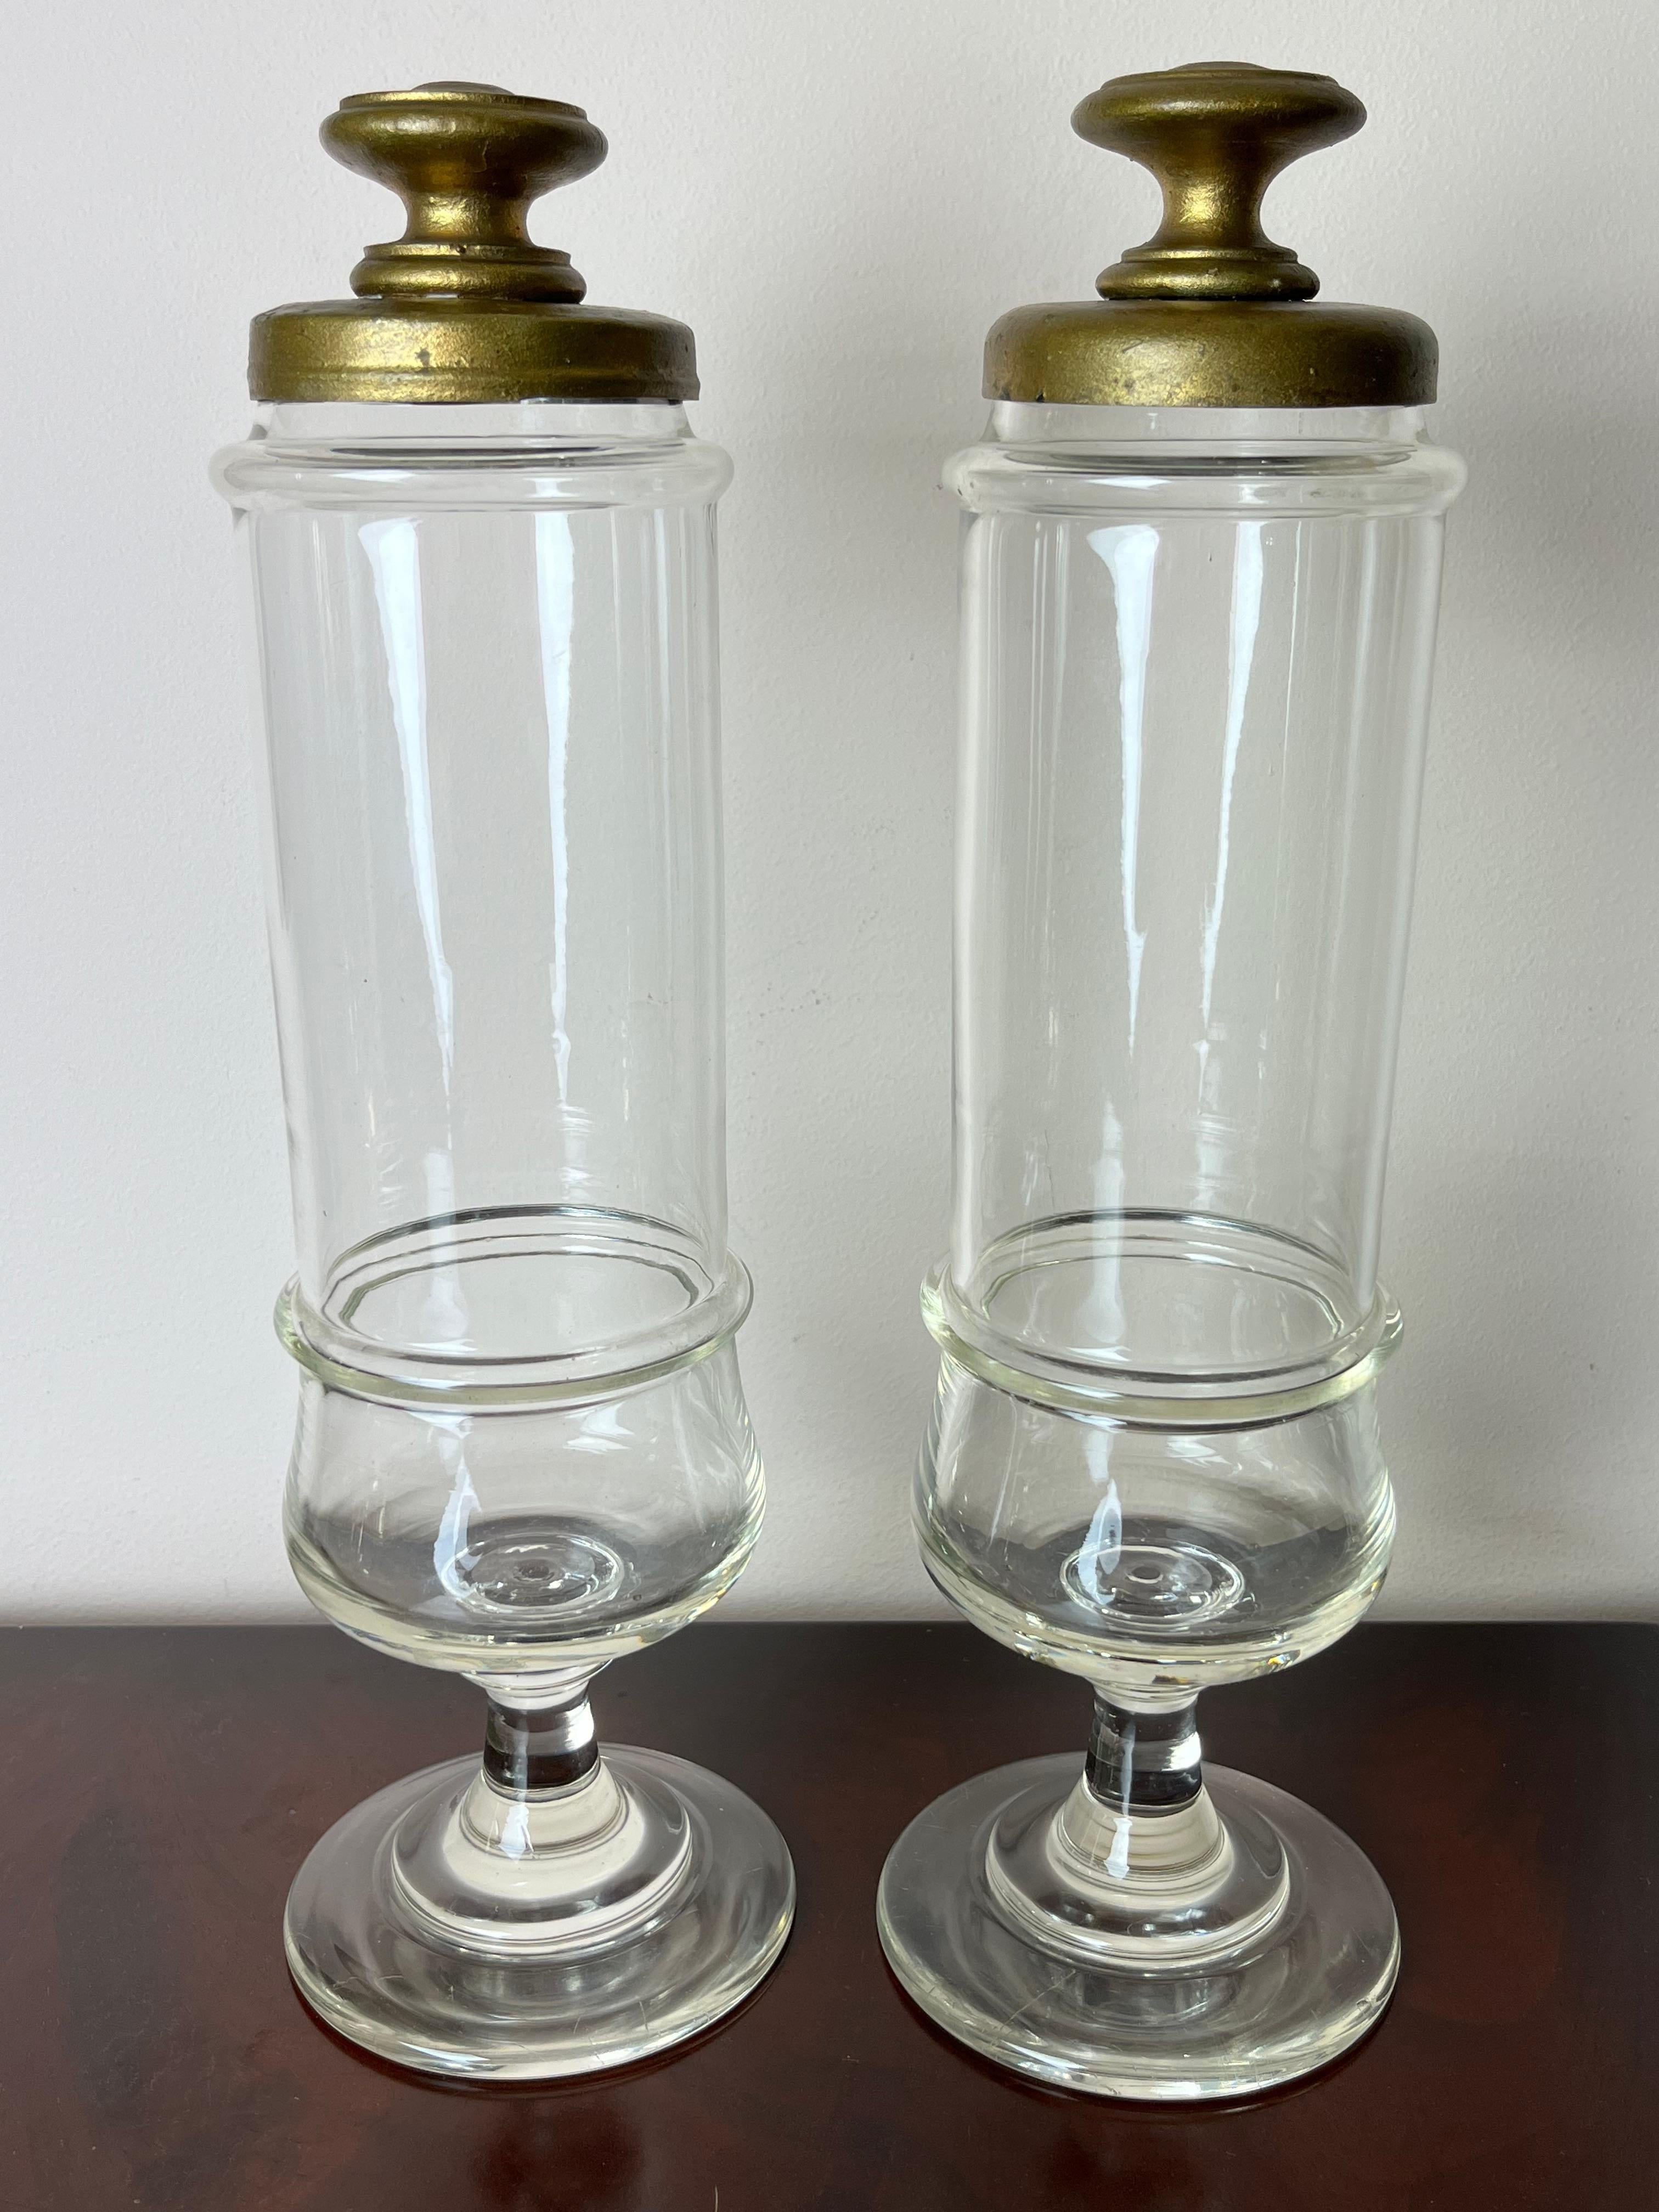 Pair of glass pharmacy jars, Italy, 1930s
Found in an old disused pharmacy.
Good condition. One has an imperceptible chip on the edge.
Being handcrafted, they have slightly different dimensions. By carefully observing the crystal you will notice